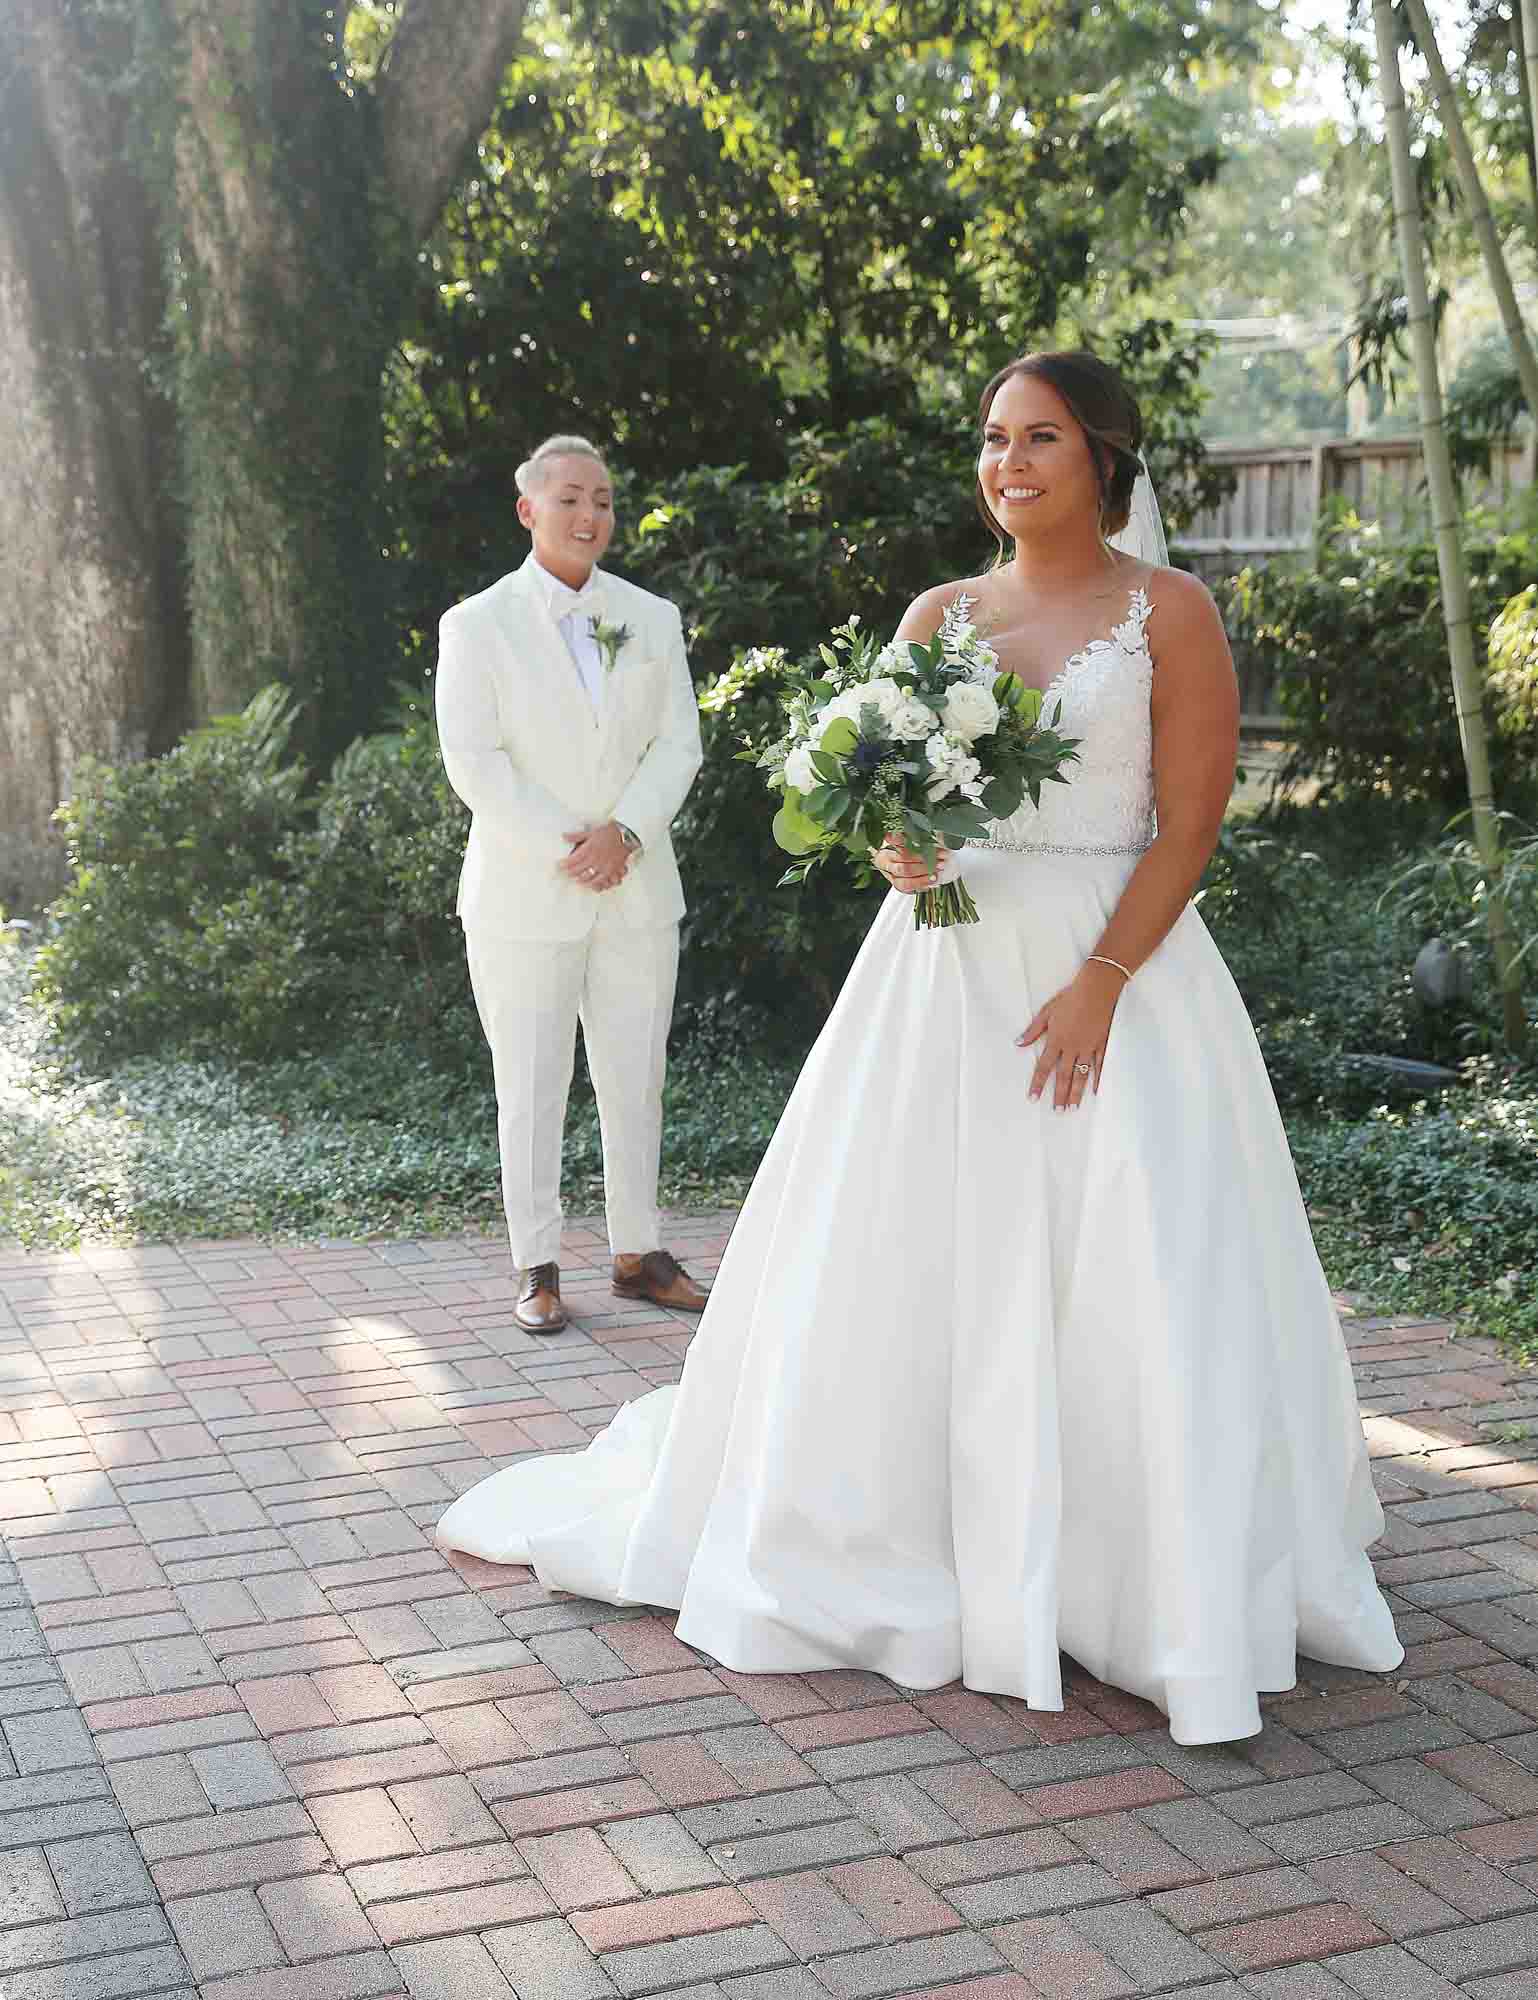 Minimalist Louisiana wedding with floral cake and sparkler send off | Just Be PhotoJennic  | Featured on Equally Wed, the leading LGBTQ+ wedding magazine